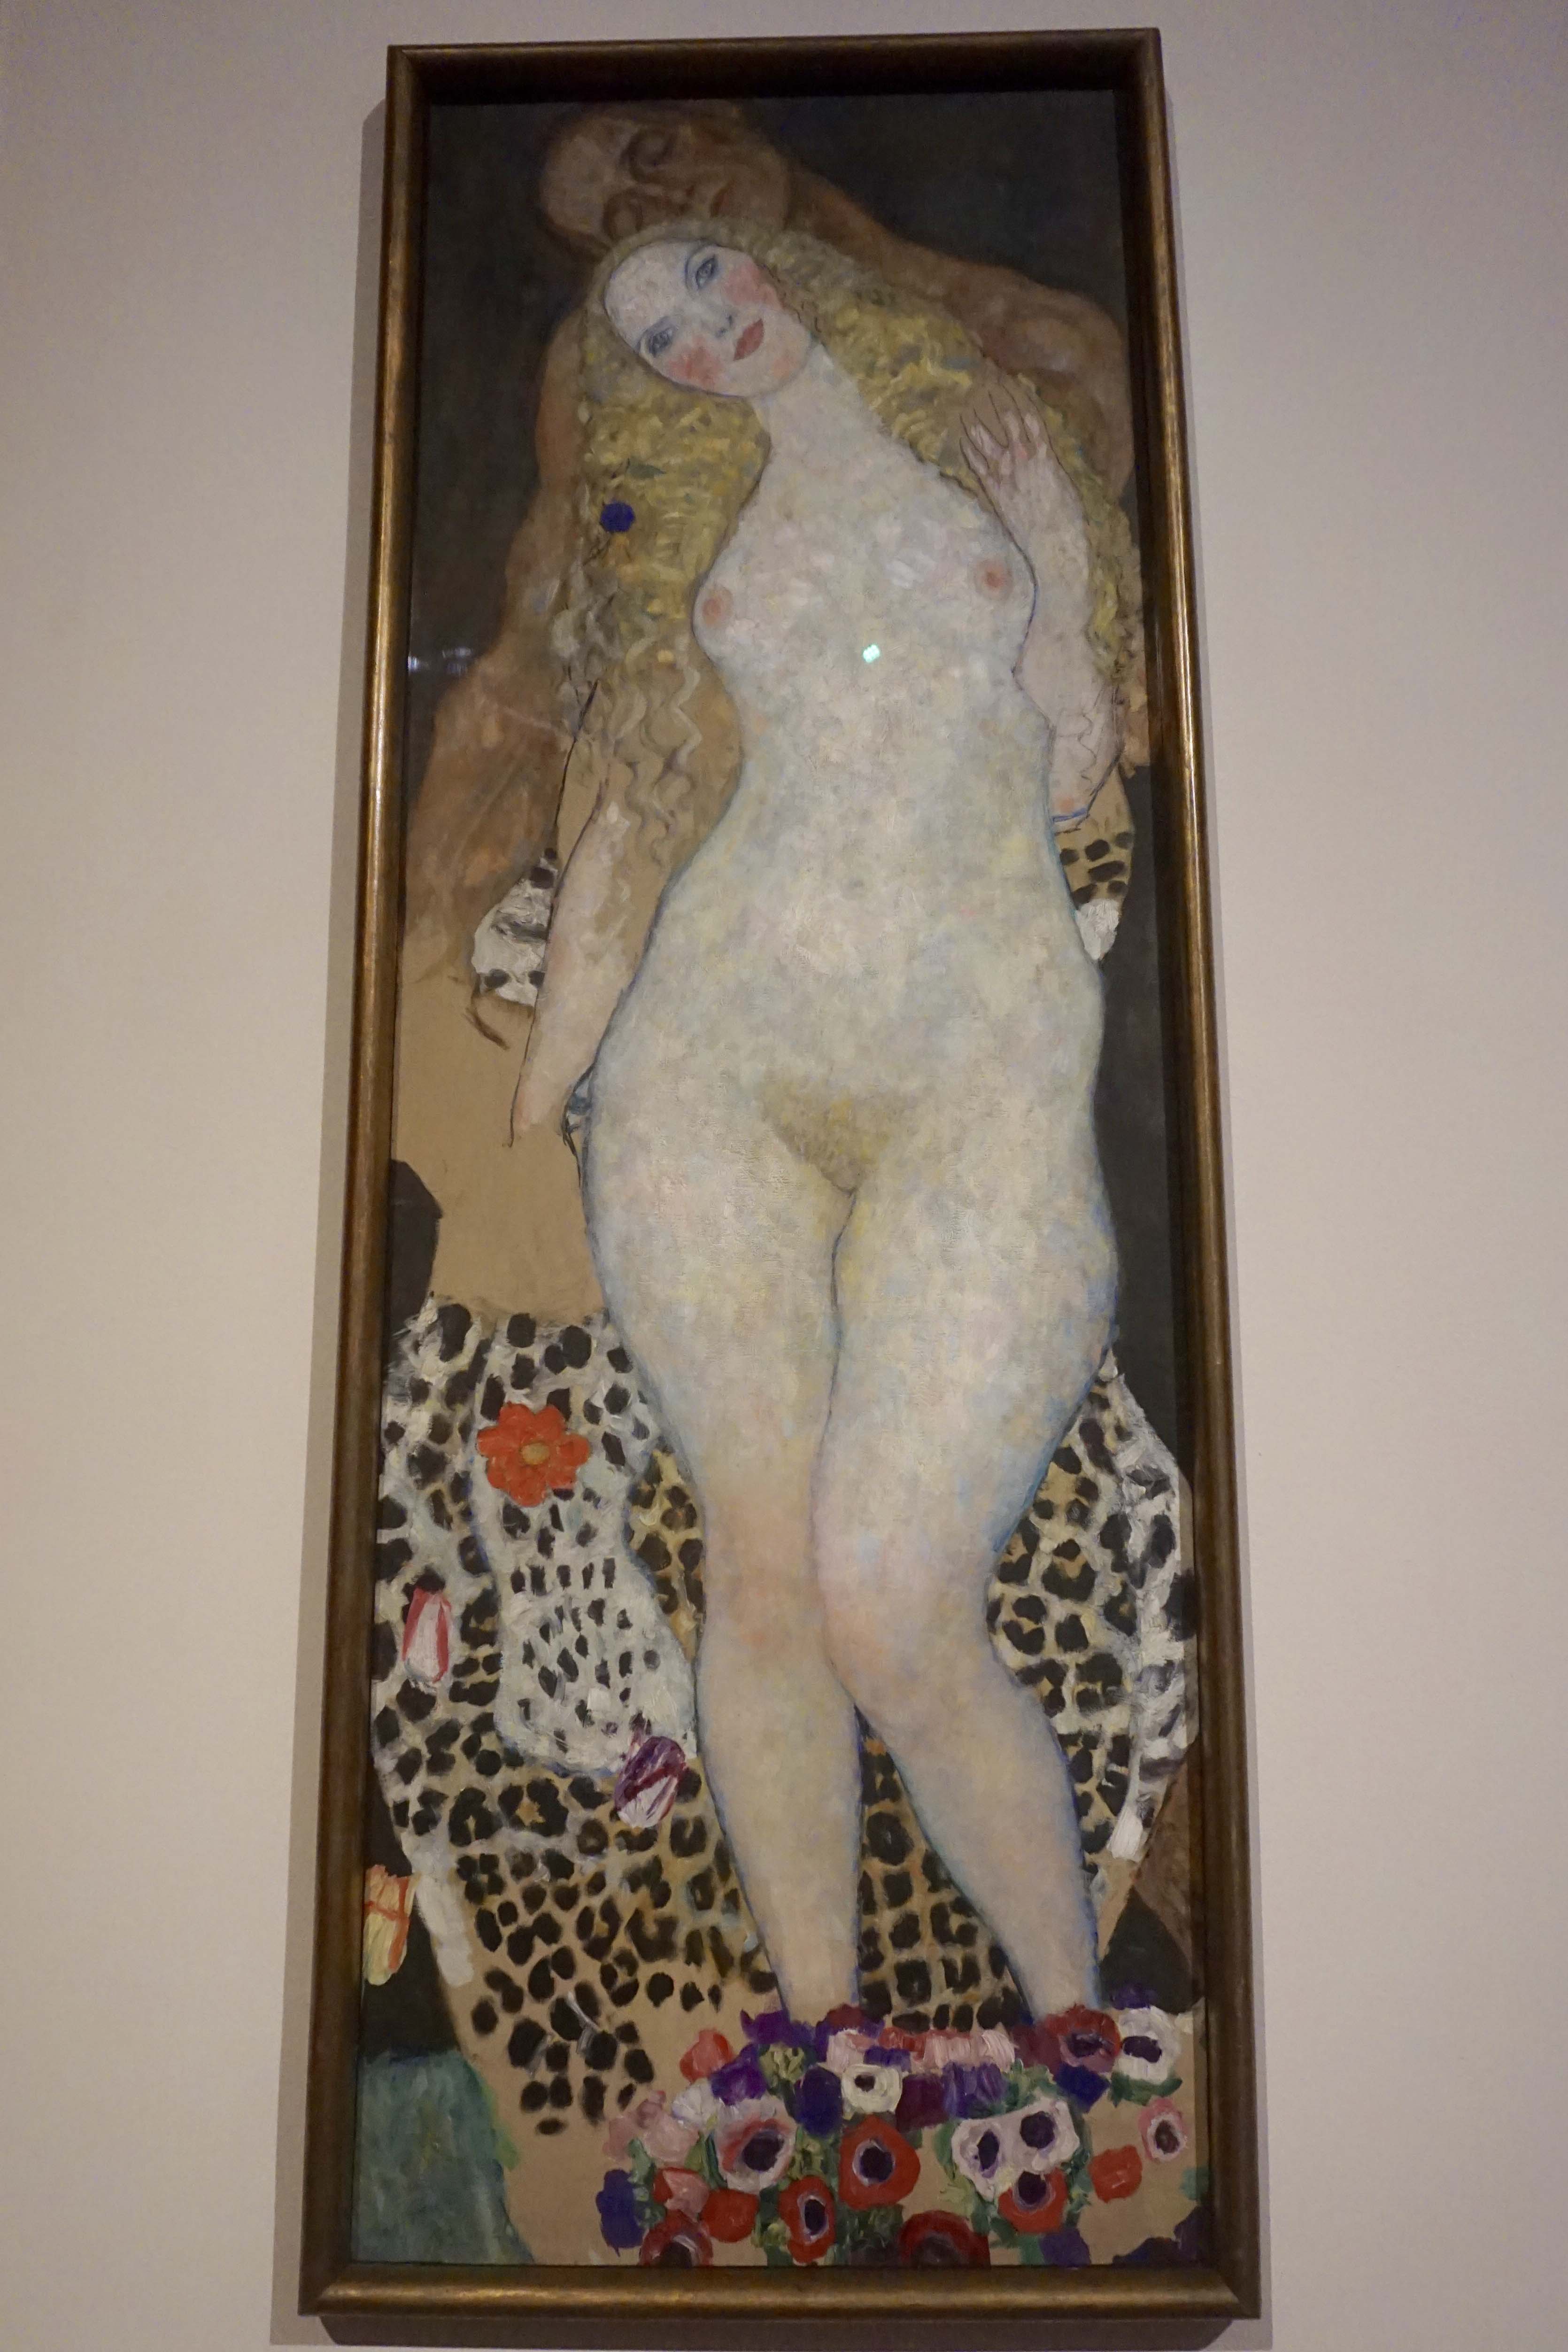 Adam and Eve, unfinished painting by Klimt at Belvedere Vienna 